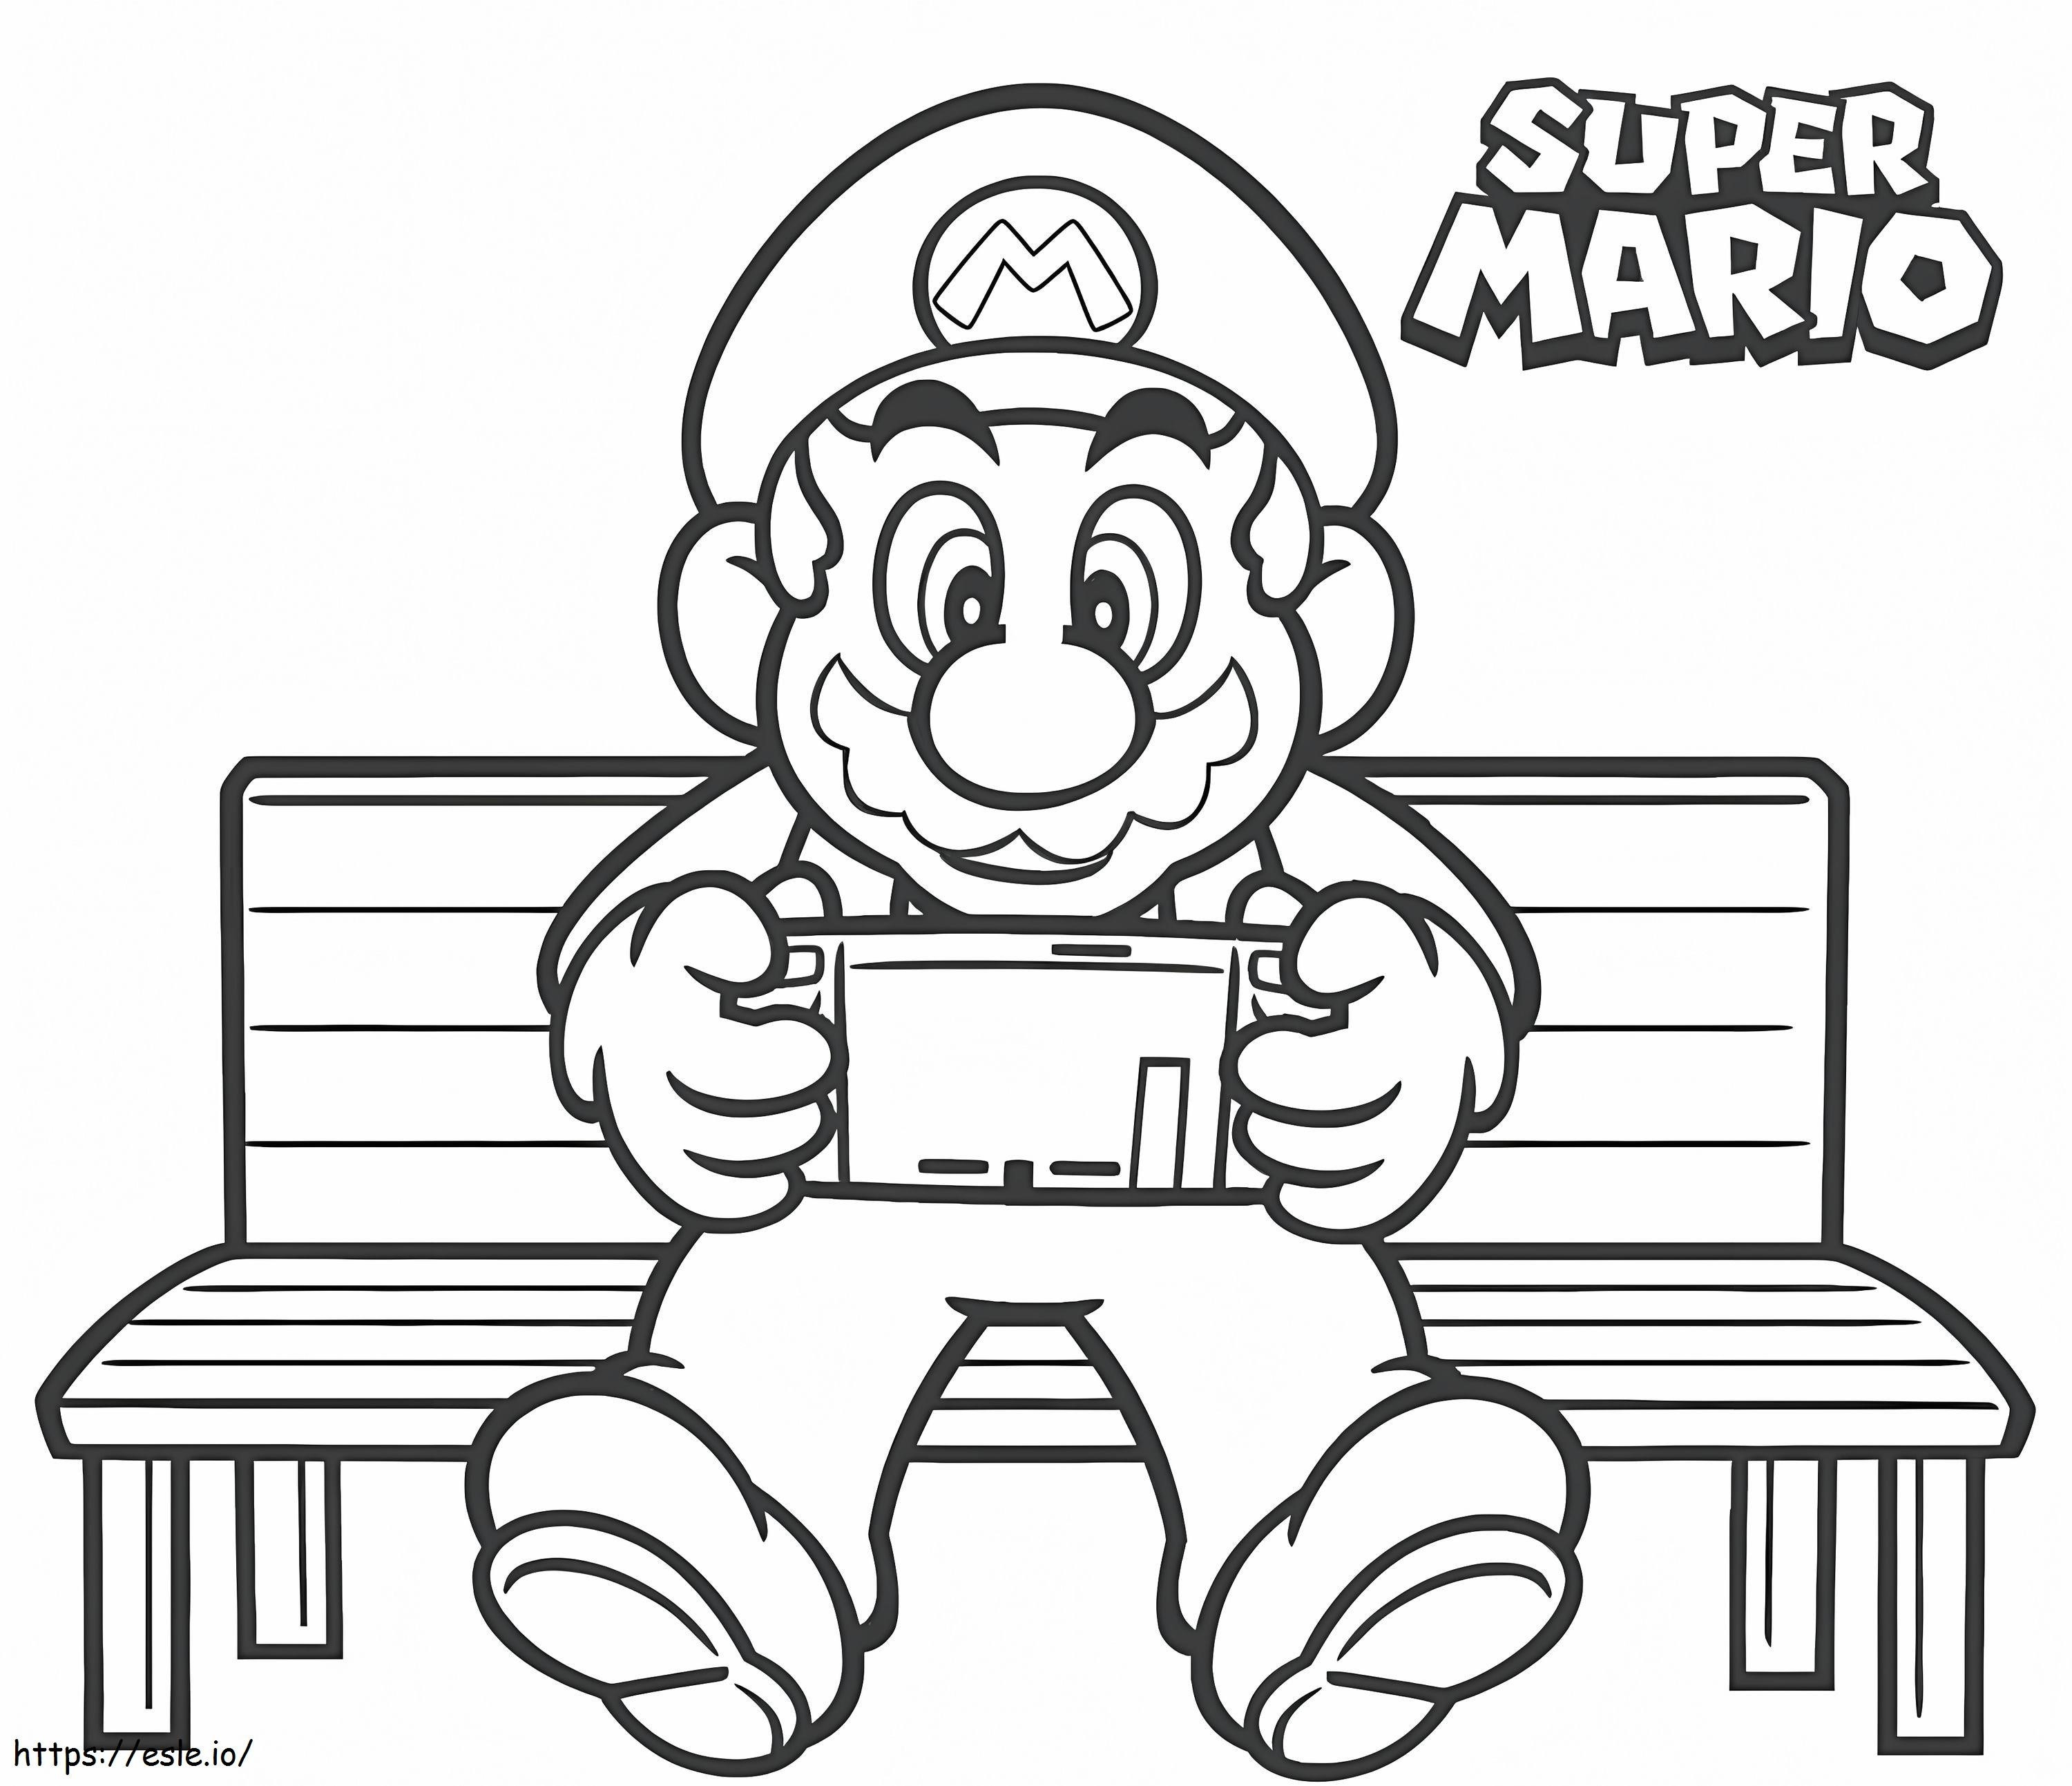 Mario Playing Game coloring page